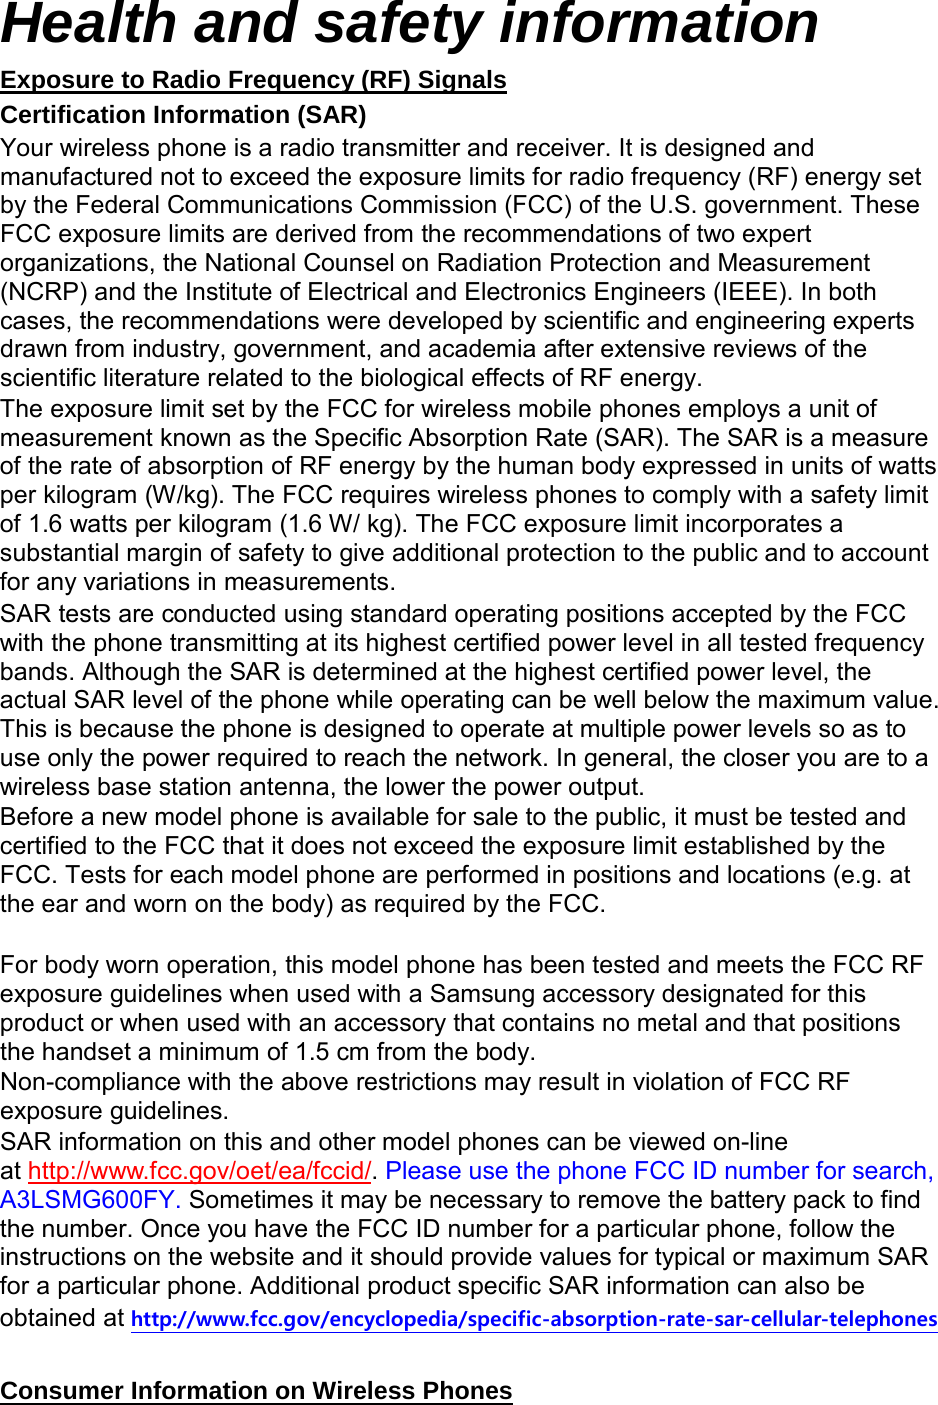 Health and safety information Certification Information (SAR) Exposure to Radio Frequency (RF) Signals Your wireless phone is a radio transmitter and receiver. It is designed and manufactured not to exceed the exposure limits for radio frequency (RF) energy set by the Federal Communications Commission (FCC) of the U.S. government. These FCC exposure limits are derived from the recommendations of two expert organizations, the National Counsel on Radiation Protection and Measurement (NCRP) and the Institute of Electrical and Electronics Engineers (IEEE). In both cases, the recommendations were developed by scientific and engineering experts drawn from industry, government, and academia after extensive reviews of the scientific literature related to the biological effects of RF energy. The exposure limit set by the FCC for wireless mobile phones employs a unit of measurement known as the Specific Absorption Rate (SAR). The SAR is a measure of the rate of absorption of RF energy by the human body expressed in units of watts per kilogram (W/kg). The FCC requires wireless phones to comply with a safety limit of 1.6 watts per kilogram (1.6 W/ kg). The FCC exposure limit incorporates a substantial margin of safety to give additional protection to the public and to account for any variations in measurements. SAR tests are conducted using standard operating positions accepted by the FCC with the phone transmitting at its highest certified power level in all tested frequency bands. Although the SAR is determined at the highest certified power level, the actual SAR level of the phone while operating can be well below the maximum value. This is because the phone is designed to operate at multiple power levels so as to use only the power required to reach the network. In general, the closer you are to a wireless base station antenna, the lower the power output. Before a new model phone is available for sale to the public, it must be tested and certified to the FCC that it does not exceed the exposure limit established by the FCC. Tests for each model phone are performed in positions and locations (e.g. at the ear and worn on the body) as required by the FCC.      For body worn operation, this model phone has been tested and meets the FCC RF exposure guidelines when used with a Samsung accessory designated for this product or when used with an accessory that contains no metal and that positions the handset a minimum of 1.5 cm from the body.   Non-compliance with the above restrictions may result in violation of FCC RF exposure guidelines. SAR information on this and other model phones can be viewed on-line at http://www.fcc.gov/oet/ea/fccid/. Please use the phone FCC ID number for search, A3LSMG600FY. Sometimes it may be necessary to remove the battery pack to find the number. Once you have the FCC ID number for a particular phone, follow the instructions on the website and it should provide values for typical or maximum SAR for a particular phone. Additional product specific SAR information can also be obtained at http://www.fcc.gov/encyclopedia/specific-absorption-rate-sar-cellular-telephones  Consumer Information on Wireless Phones 